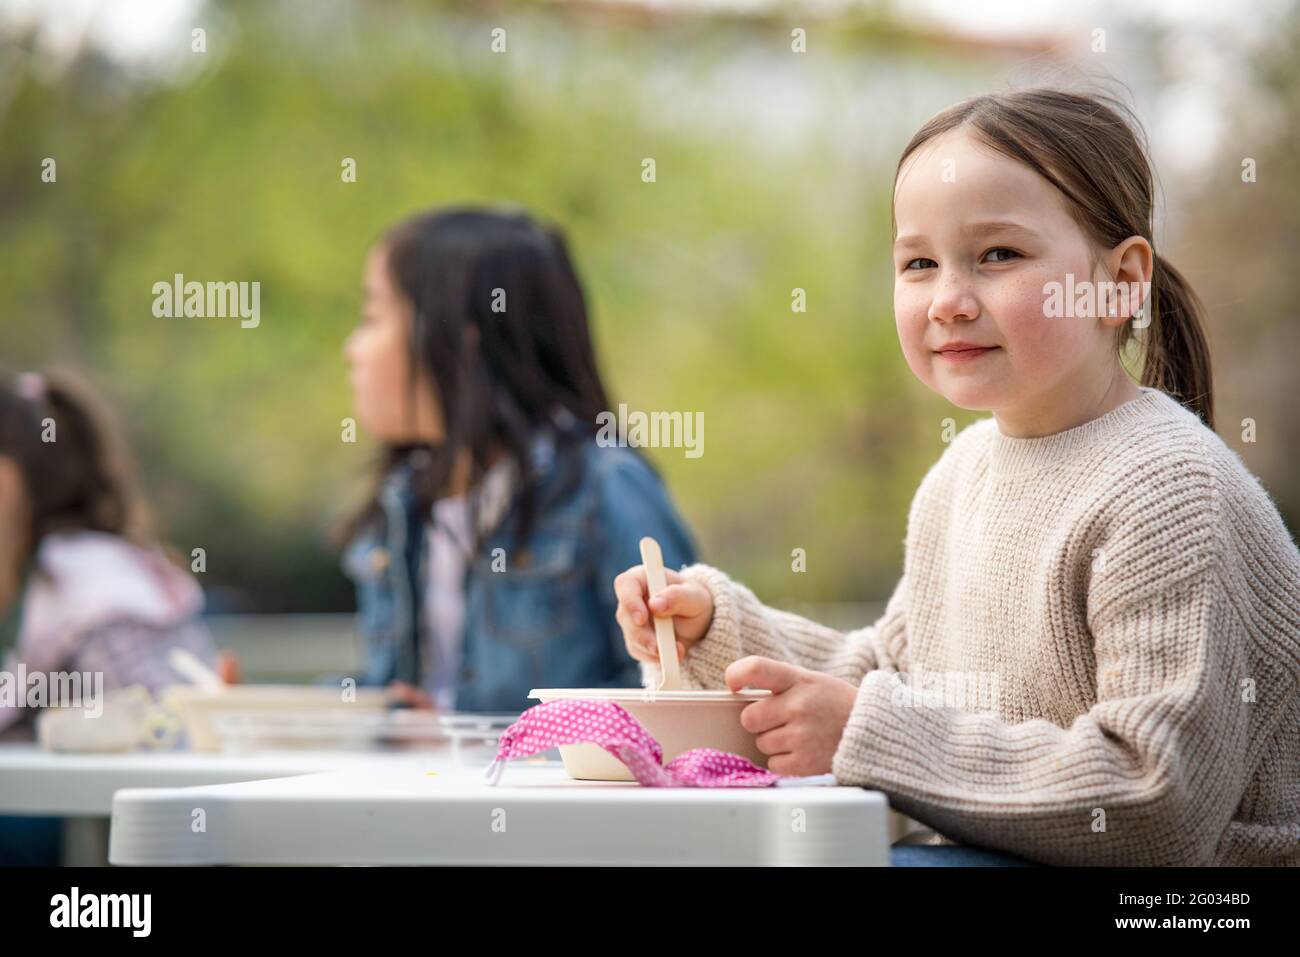 Small children eating lunch outdoors in city park, learning group education concept. Stock Photo